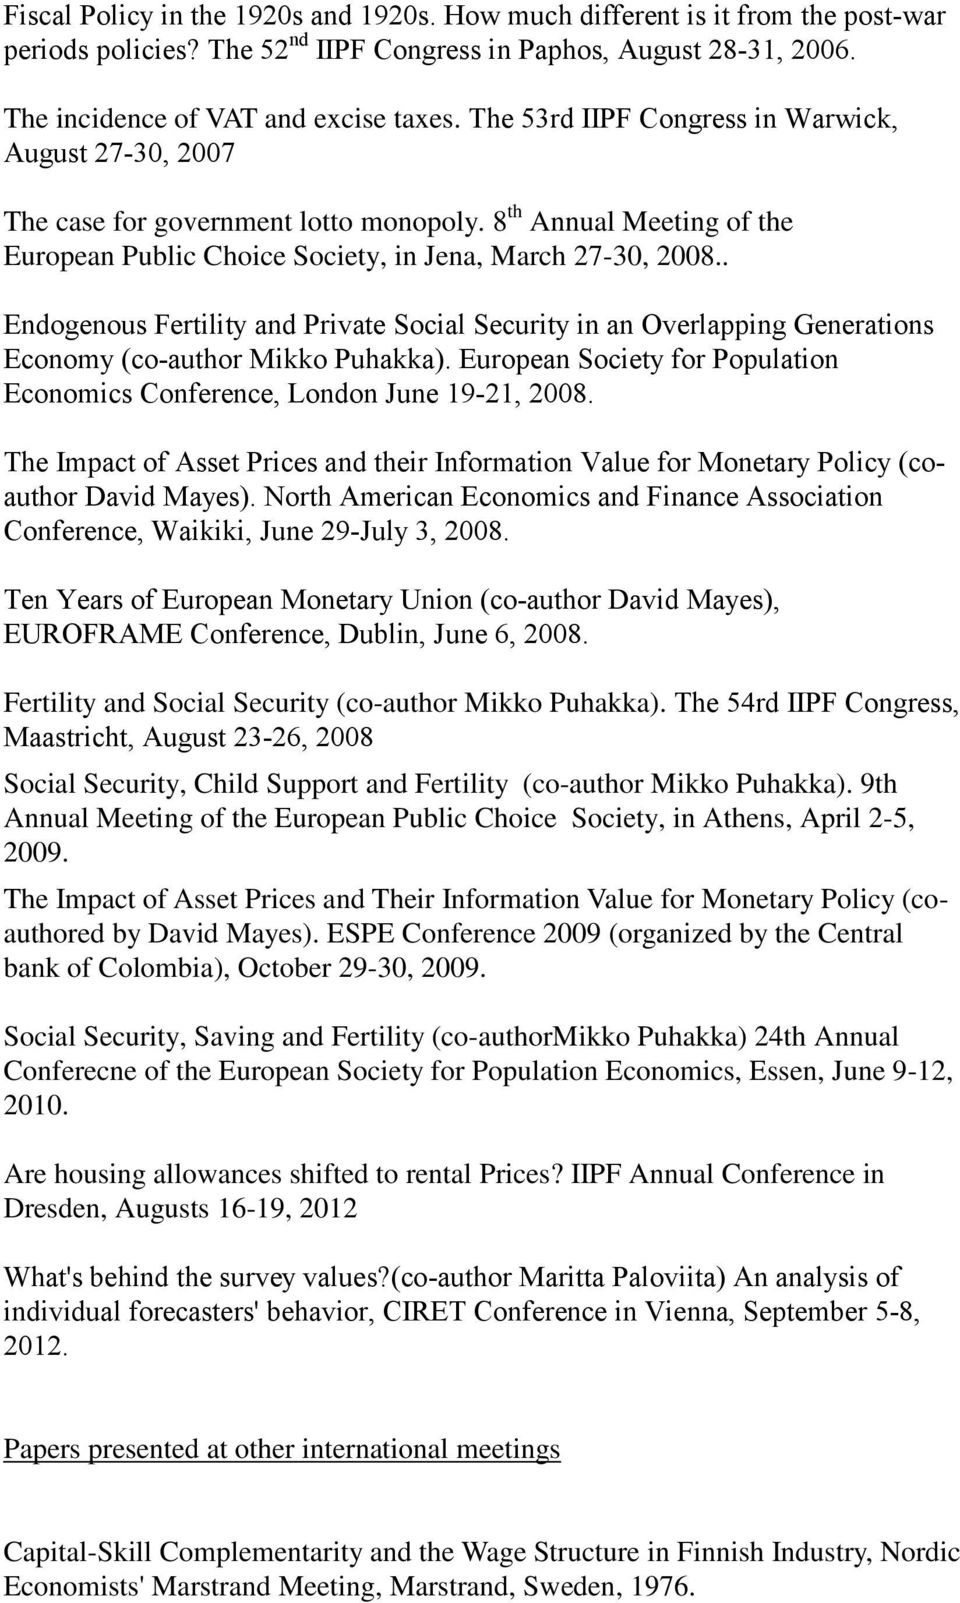 . Endogenous Fertility and Private Social Security in an Overlapping Generations Economy (co-author Mikko Puhakka). European Society for Population Economics Conference, London June 19-21, 2008.